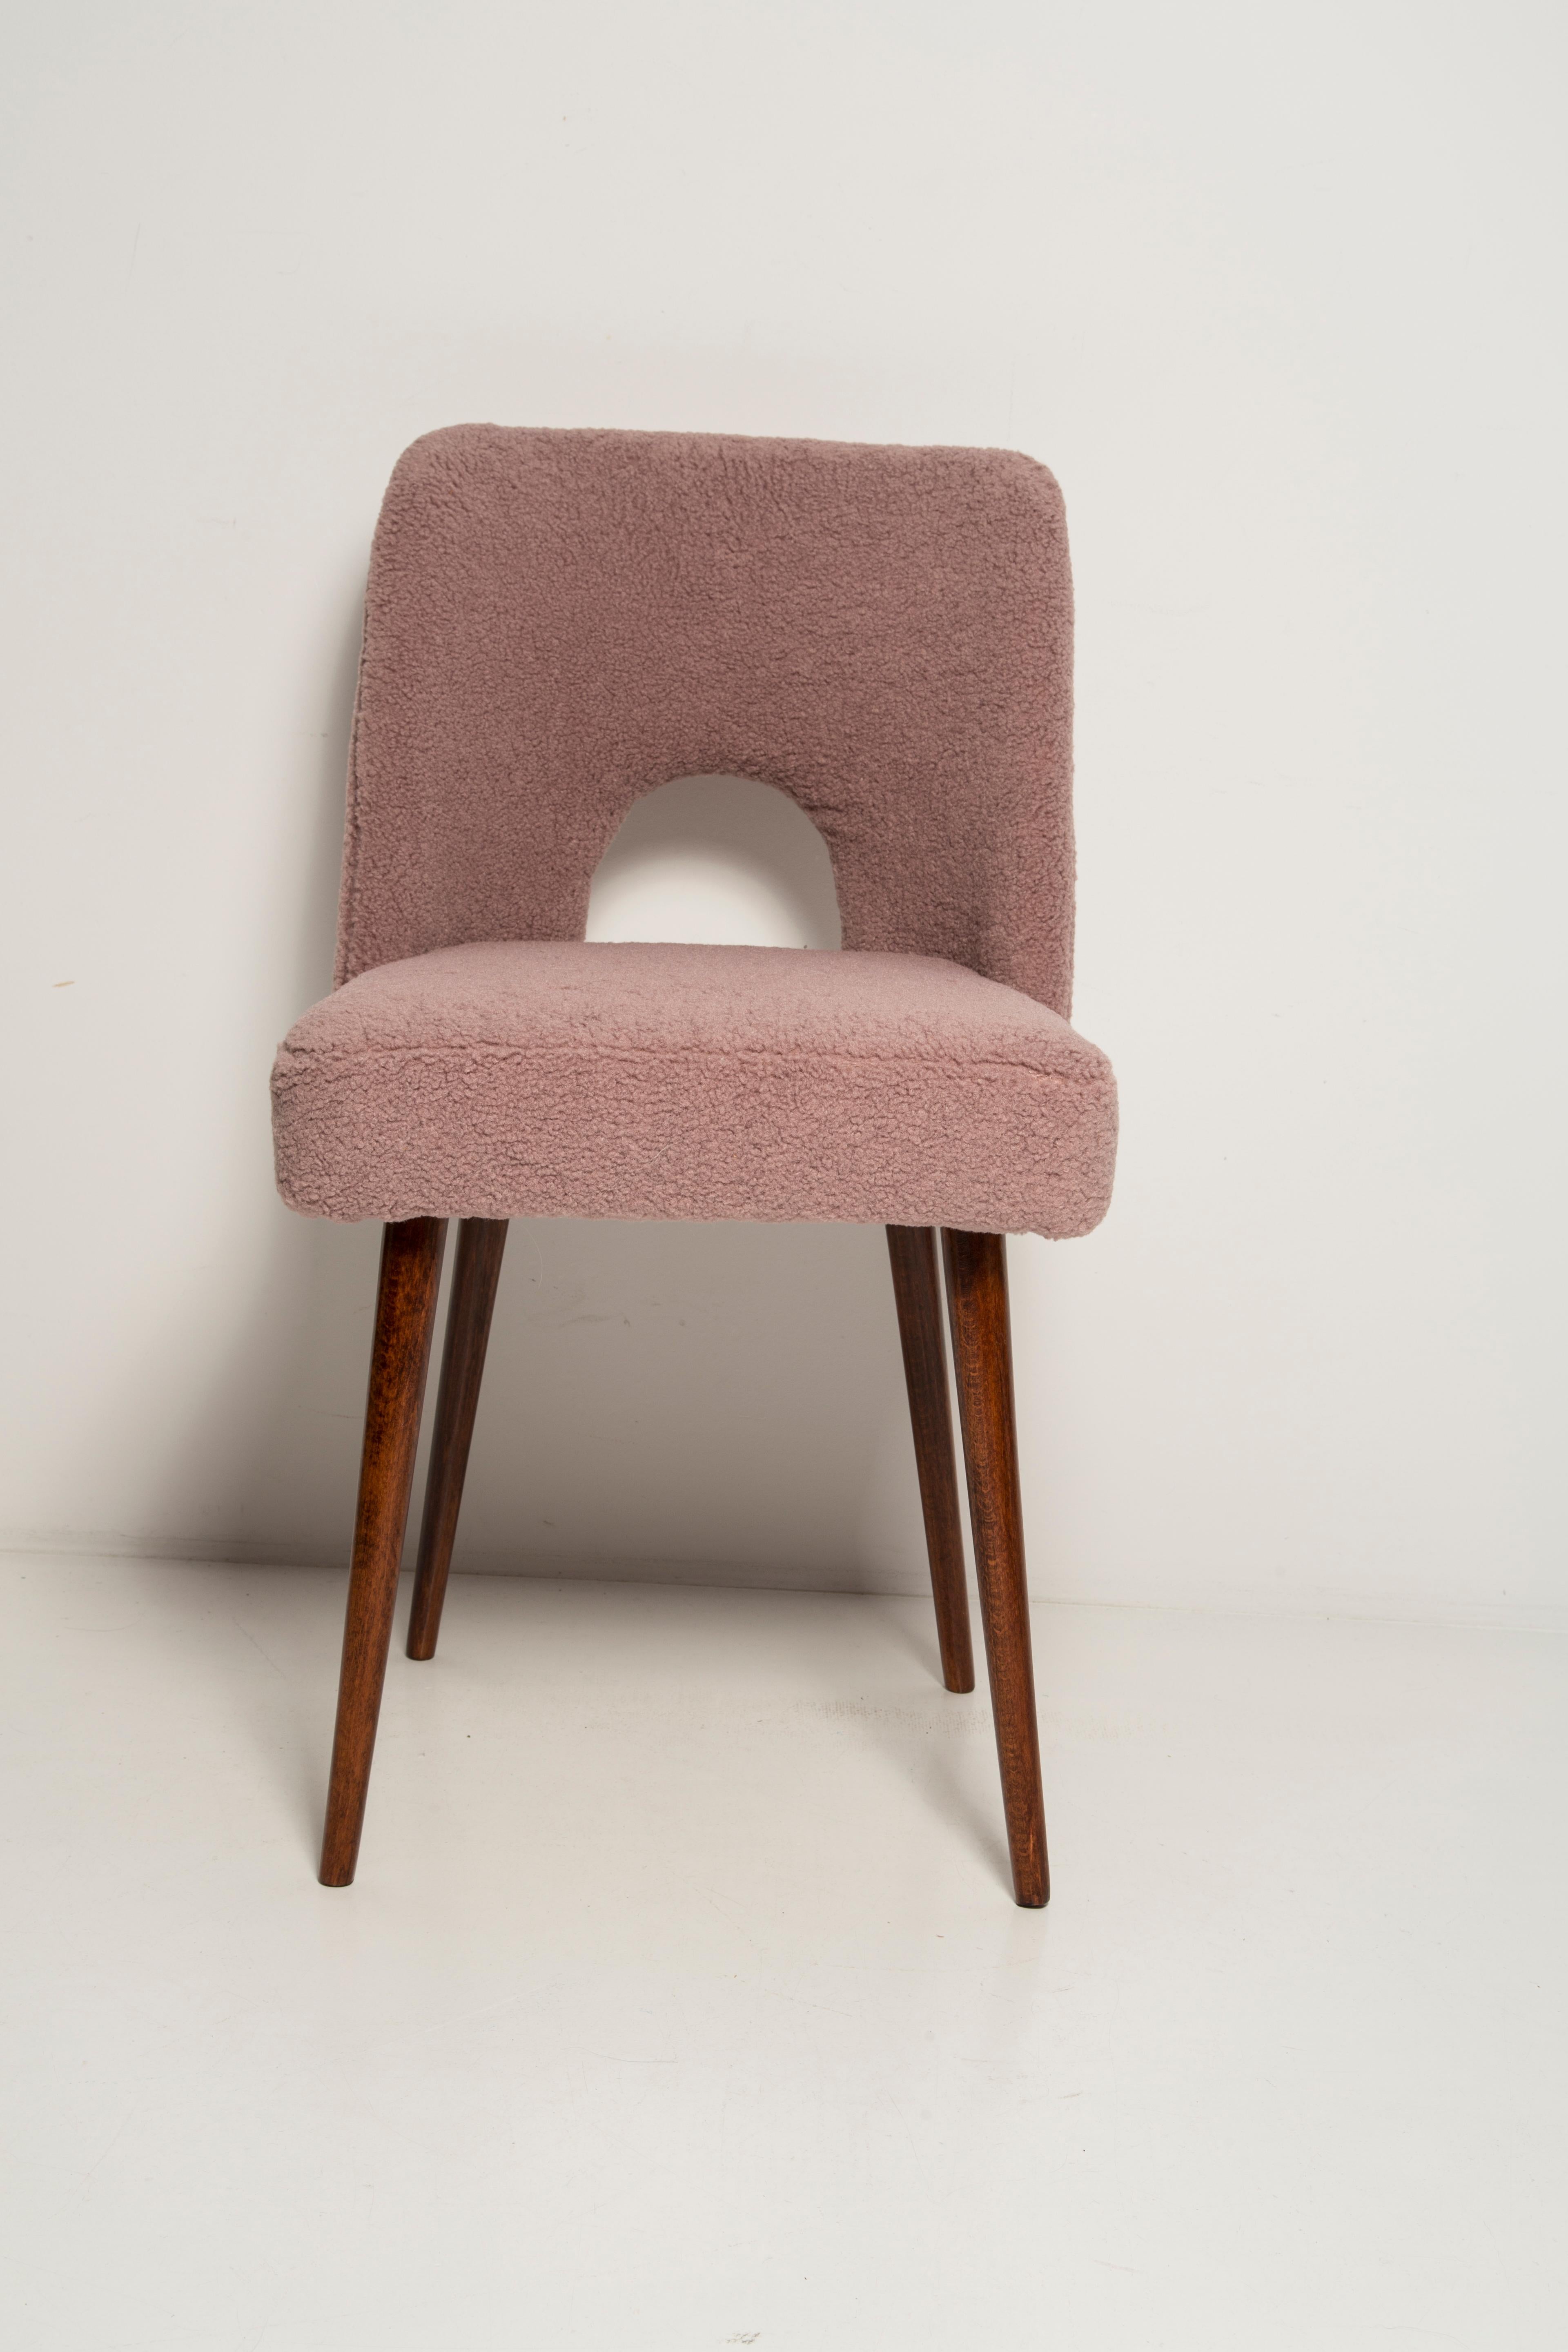 Midcentury Pink Bouclé 'Shell' Chair, Europe, 1960s For Sale 2